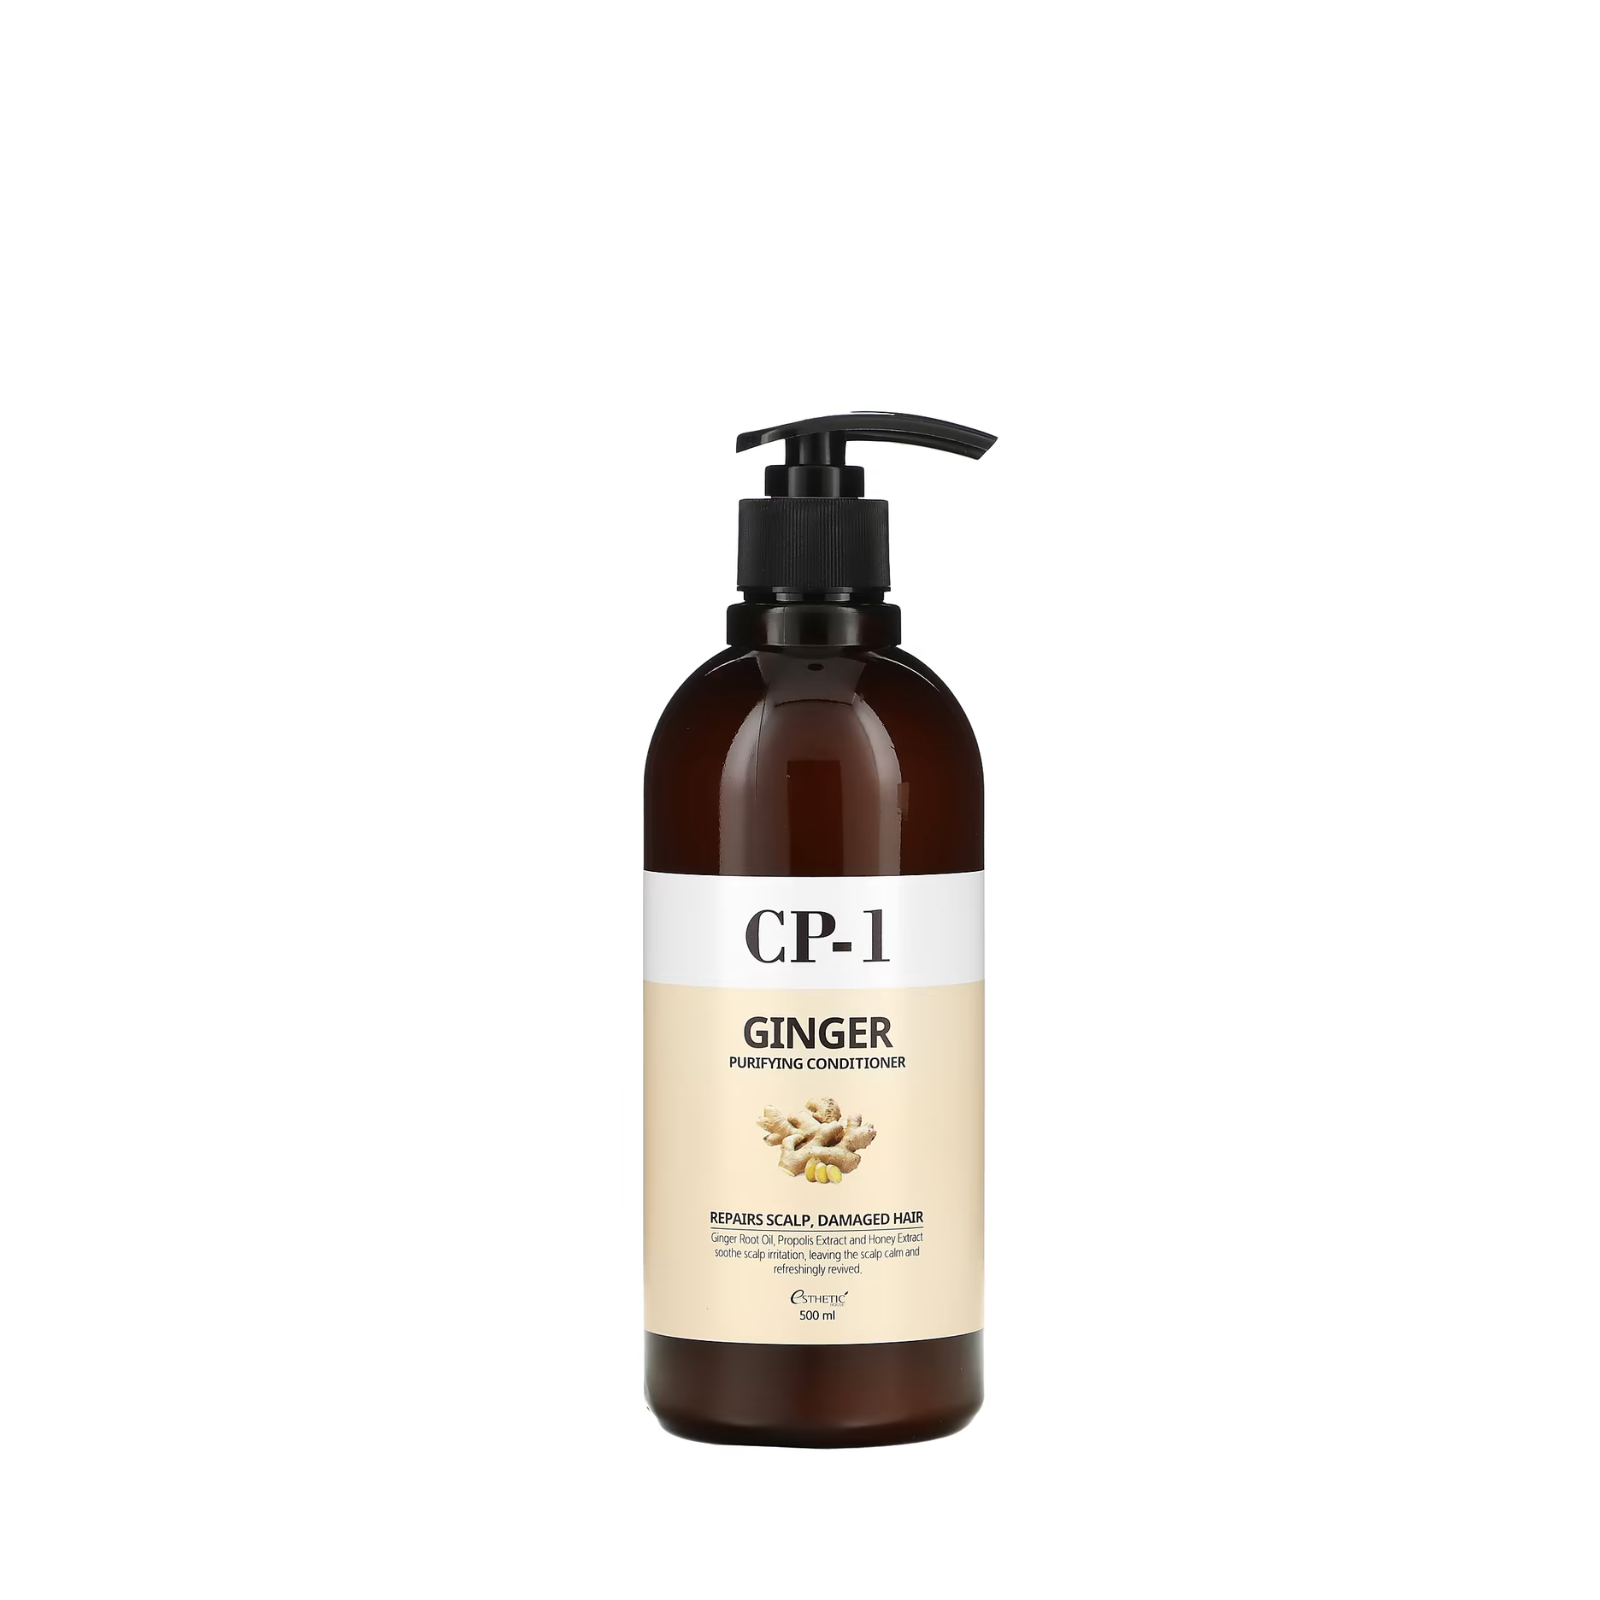 Hair conditioner with ginger extract by Esthetic House (Esthetic House CP-1 Ginger Purifying Conditioner)